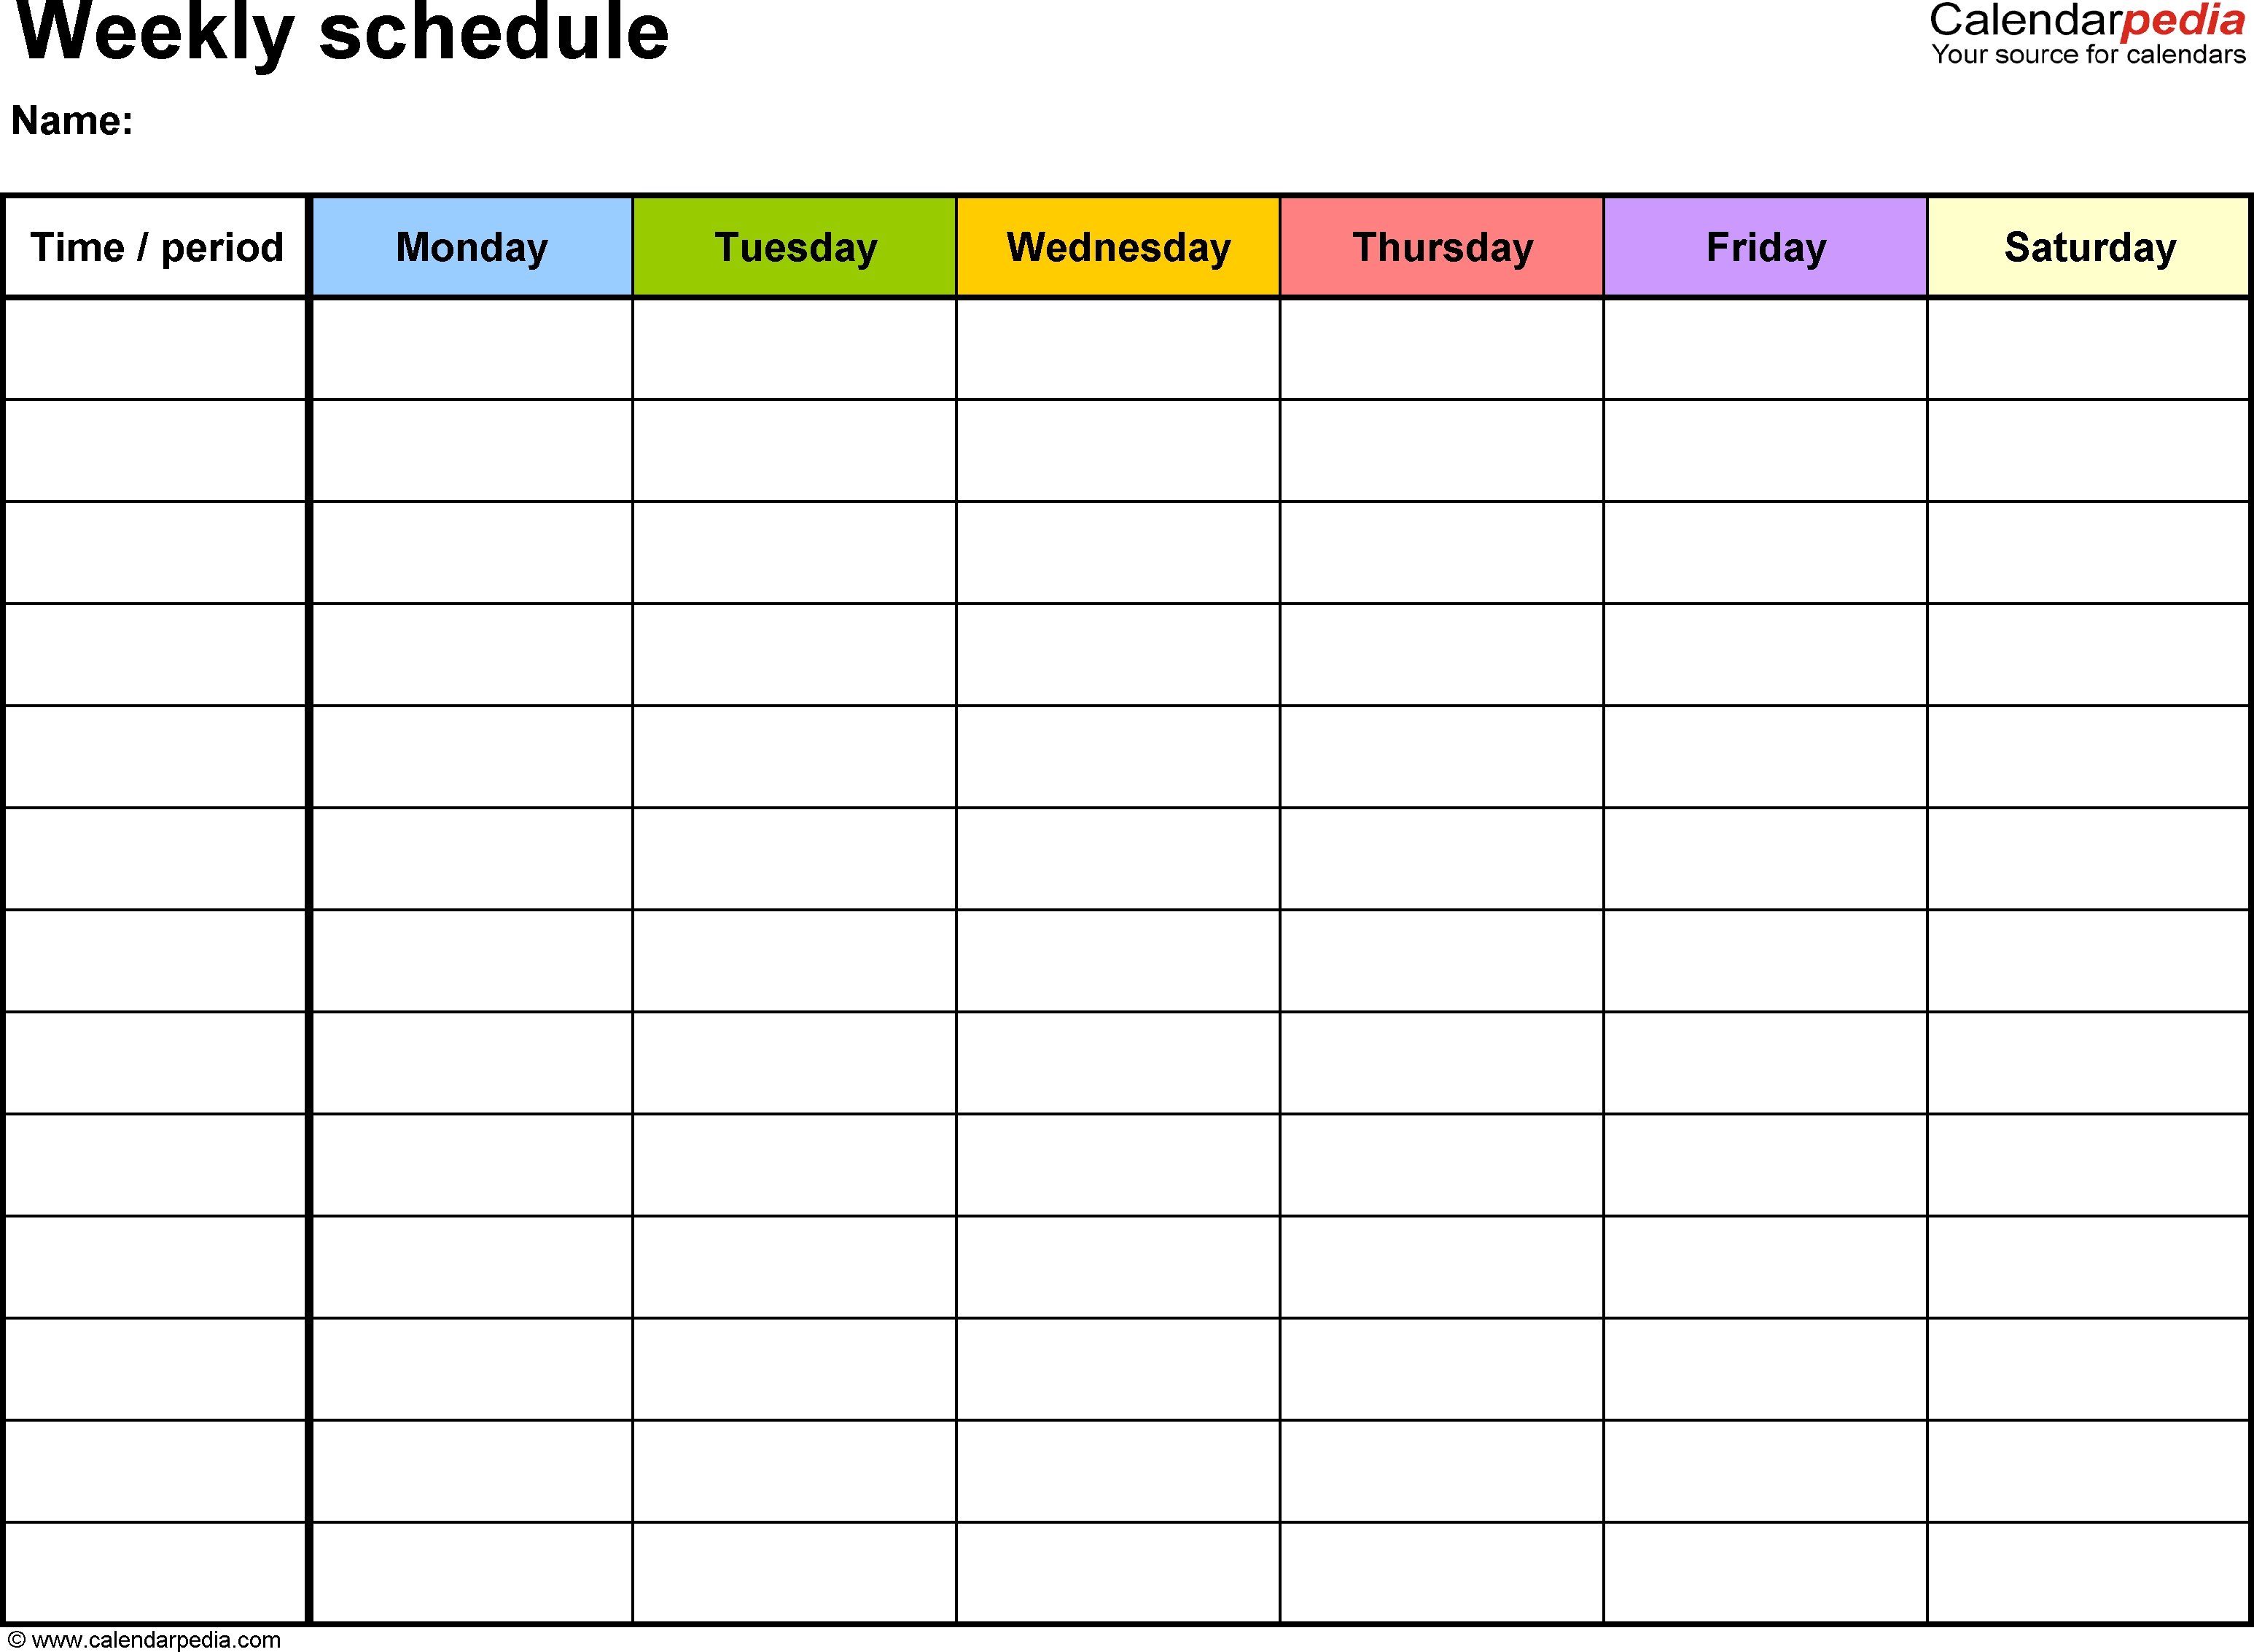 Free Weekly Schedule Templates For Word - 18 Templates  Fill In Blank Weekly Calendar Templates